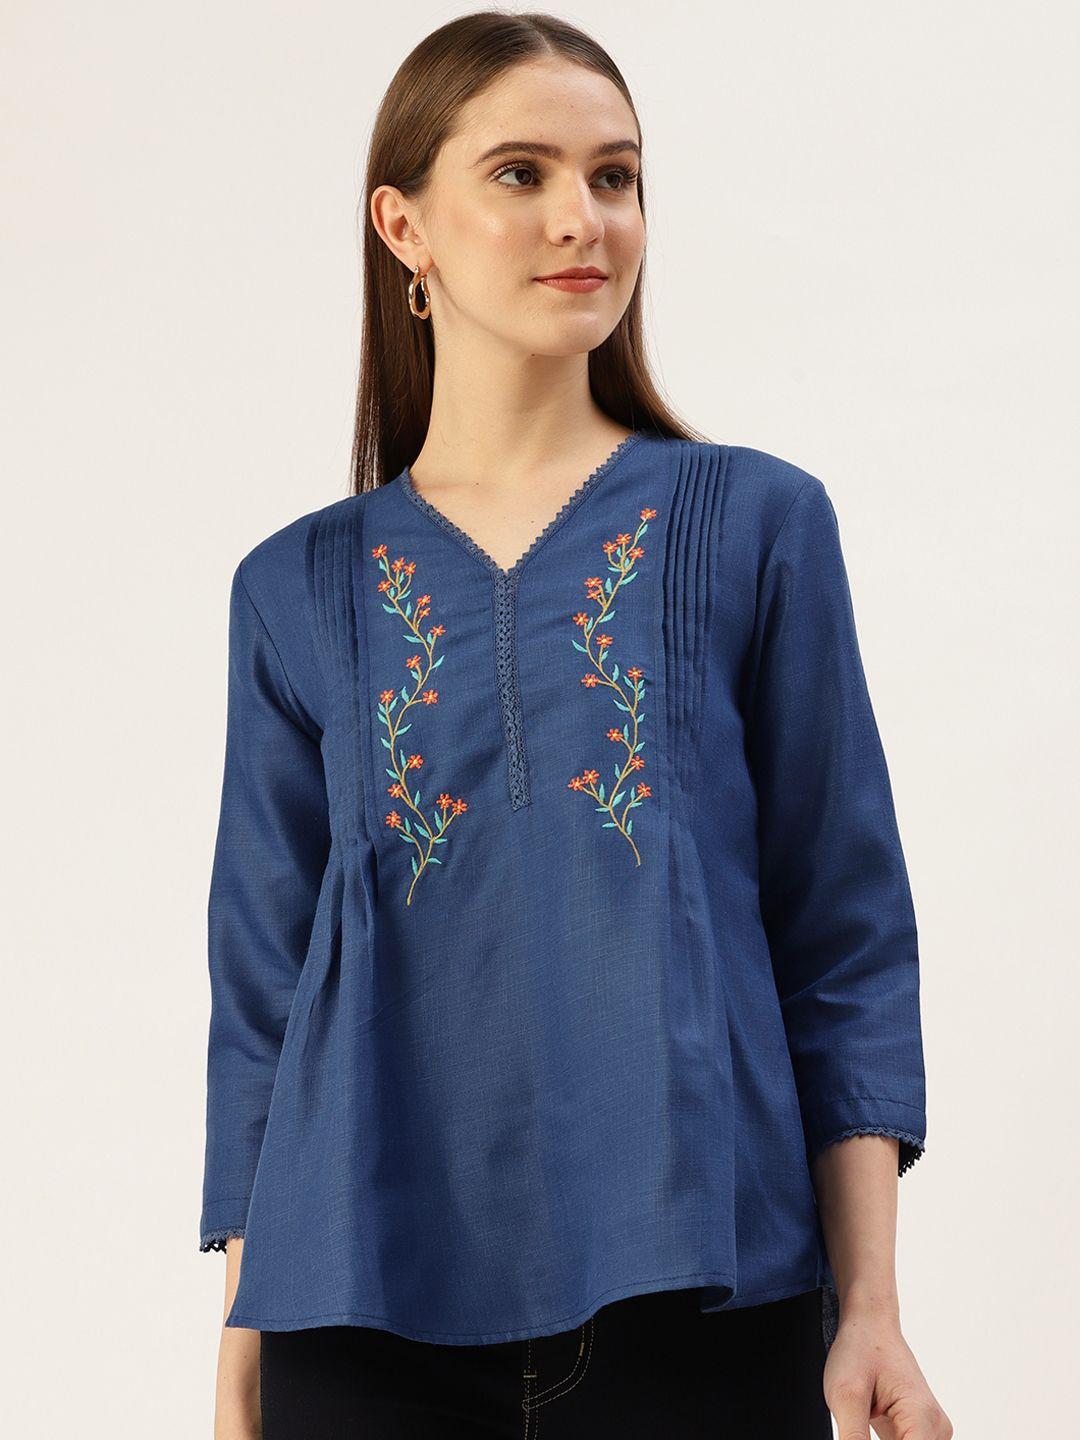 off-label-navy-blue-floral-embroidered-top